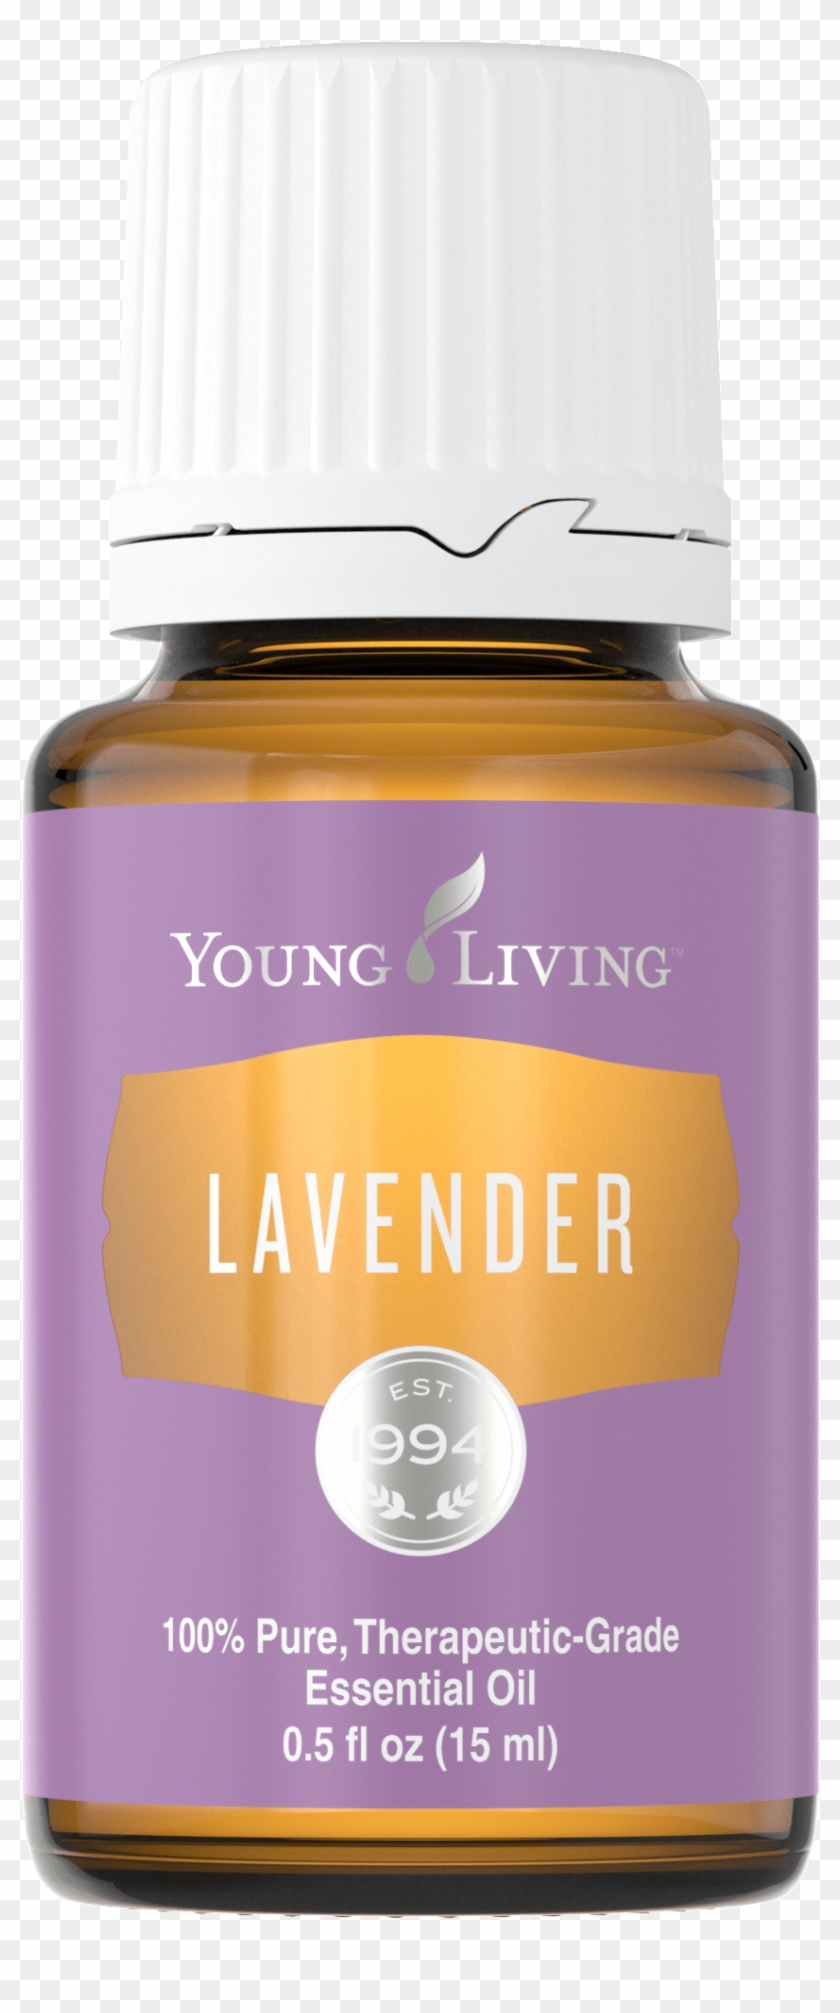 Harvested And Distilled In The U - Lavender Young Living Png Clipart #1336057